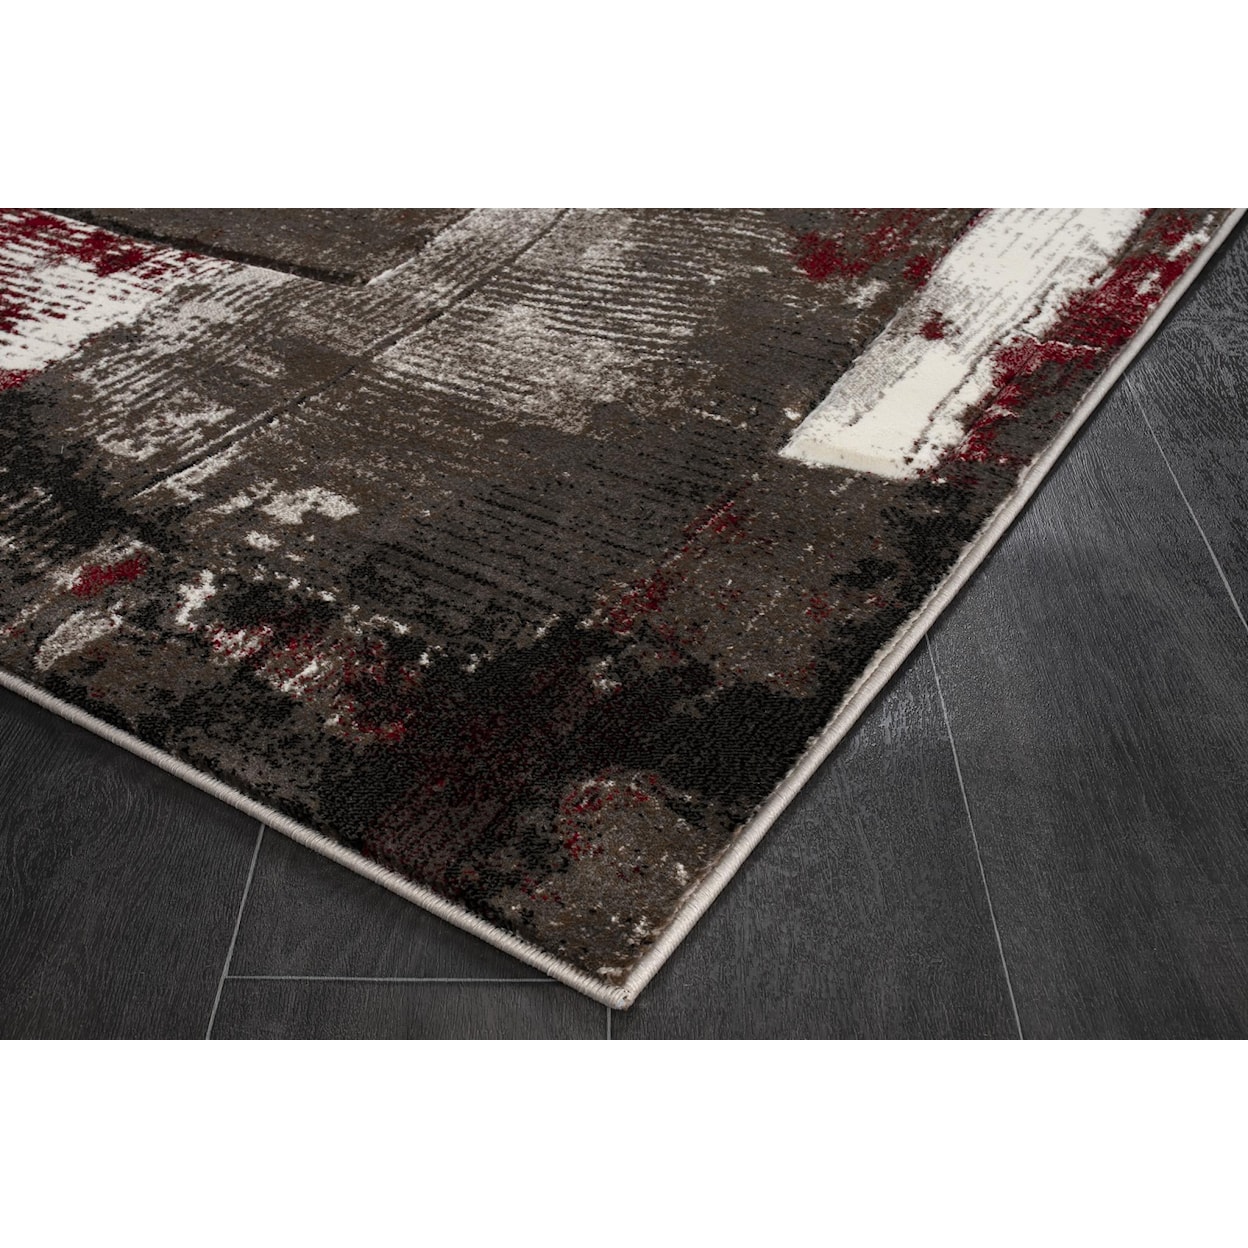 MDA Rugs Rhodes Collection RHODES 5X8 RED/BROWN AREA RUG |